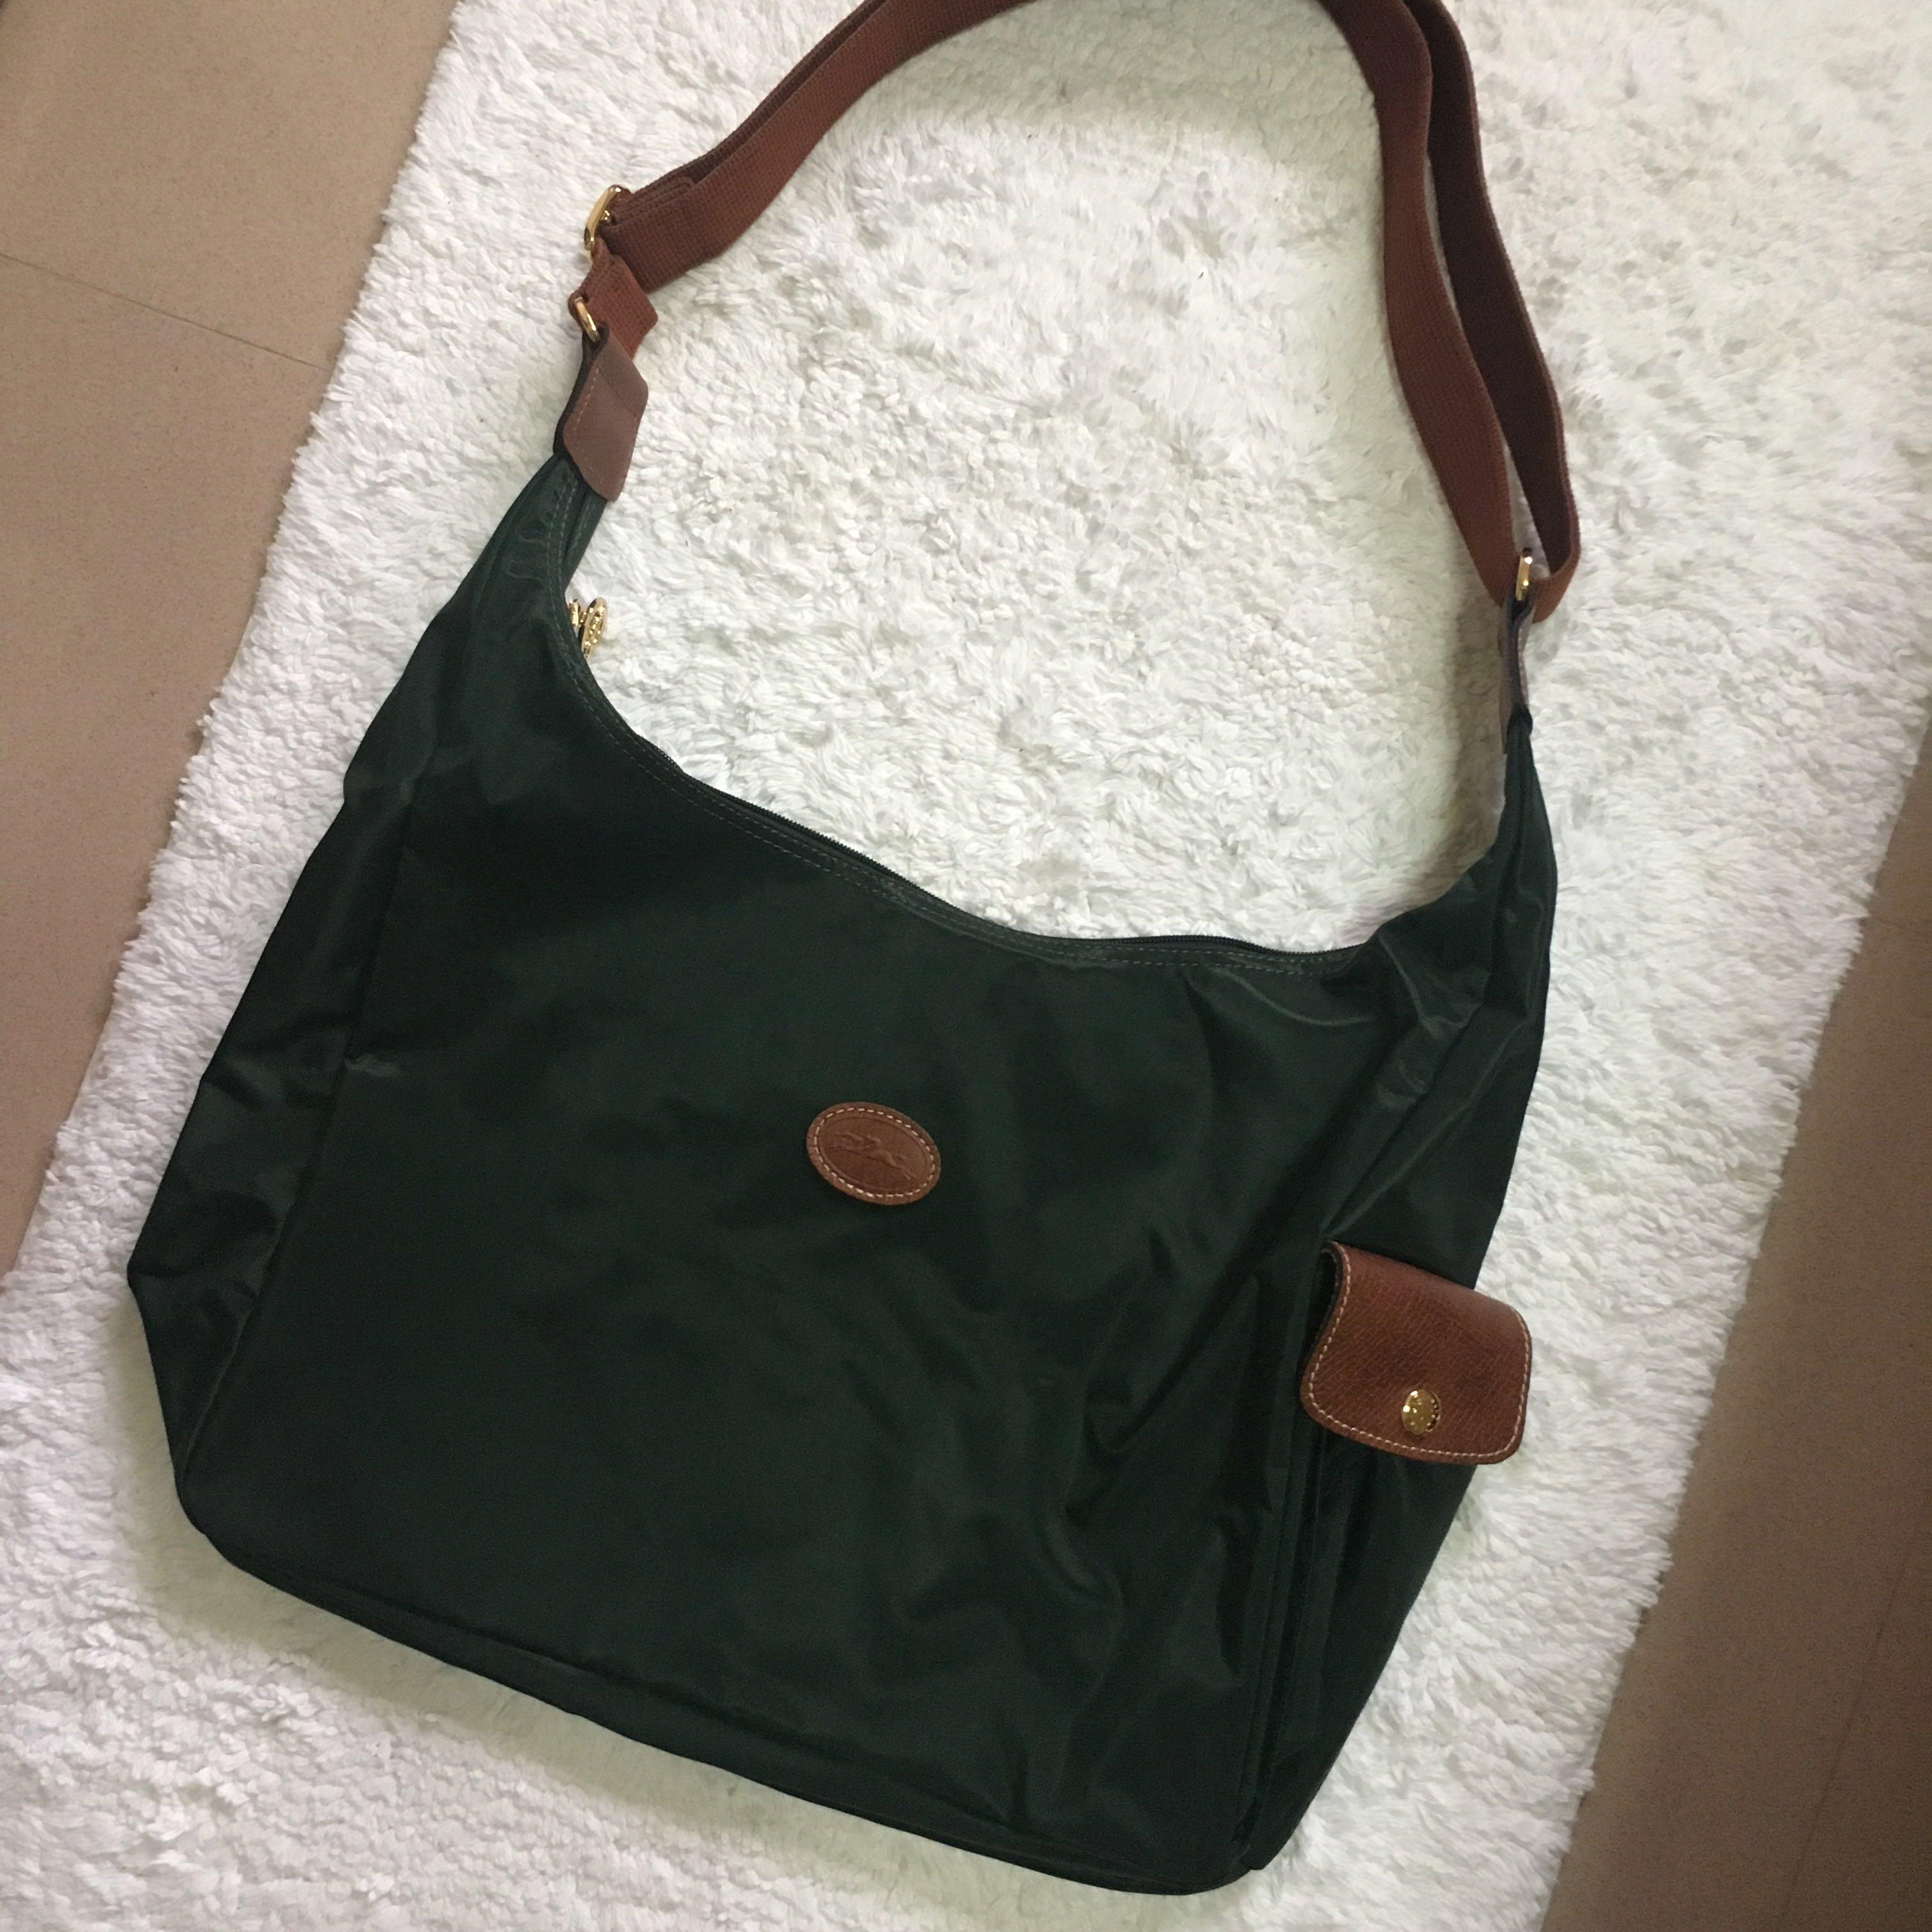 Authentic Longchamp Le Pliage Nylon Hobo Crossbody in Forest Green